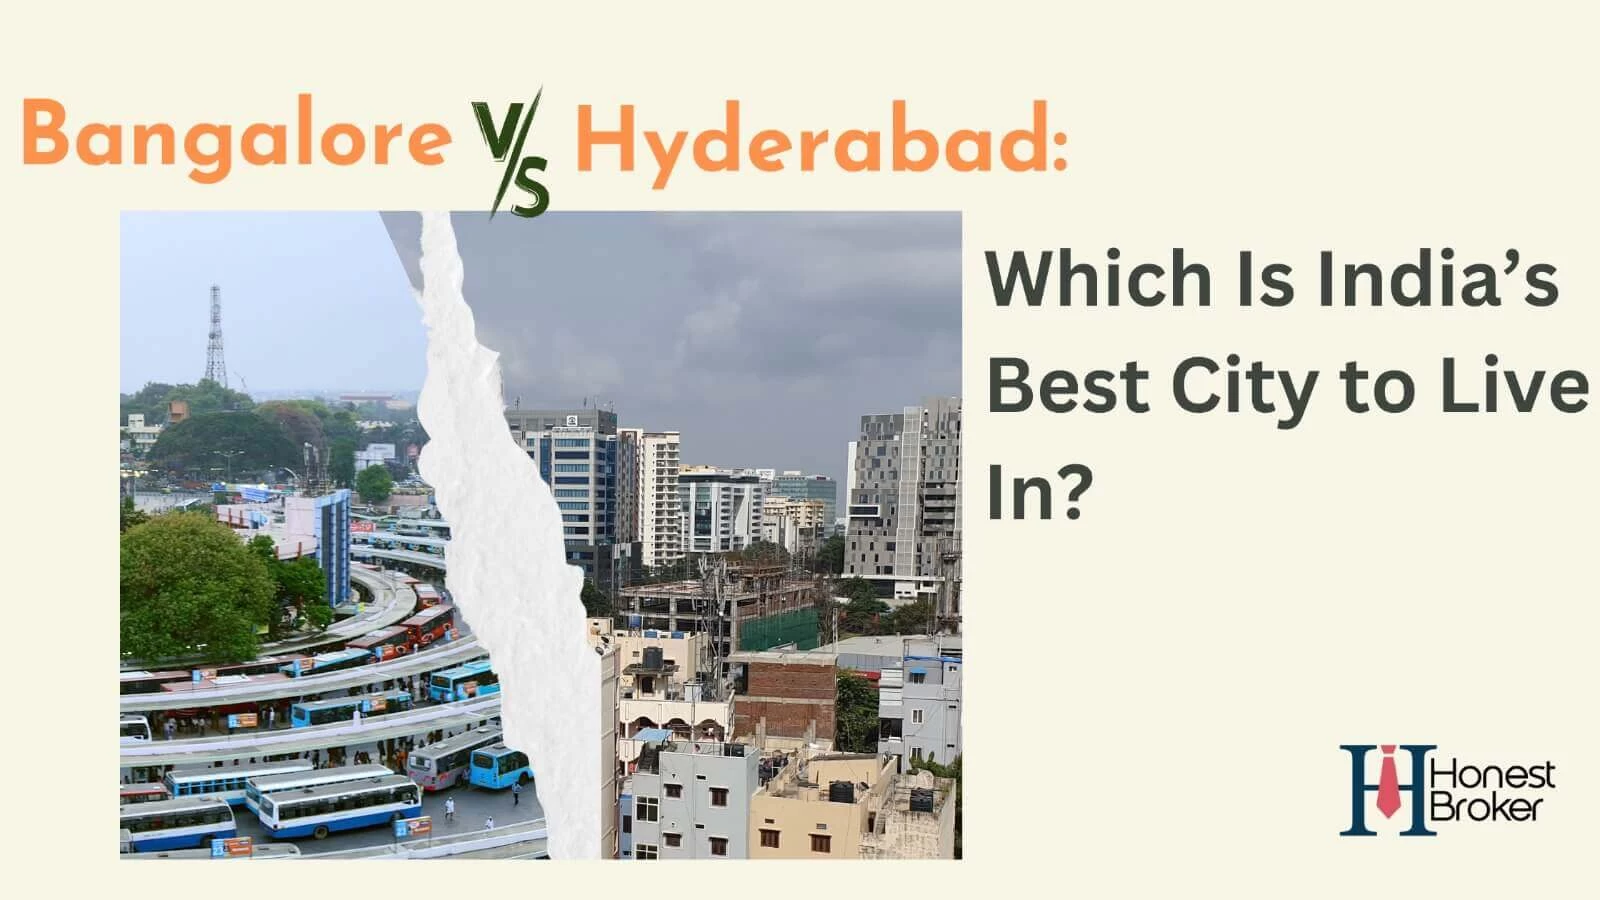 Bangalore Vs Hyderabad: Which is India's Best City to live in?